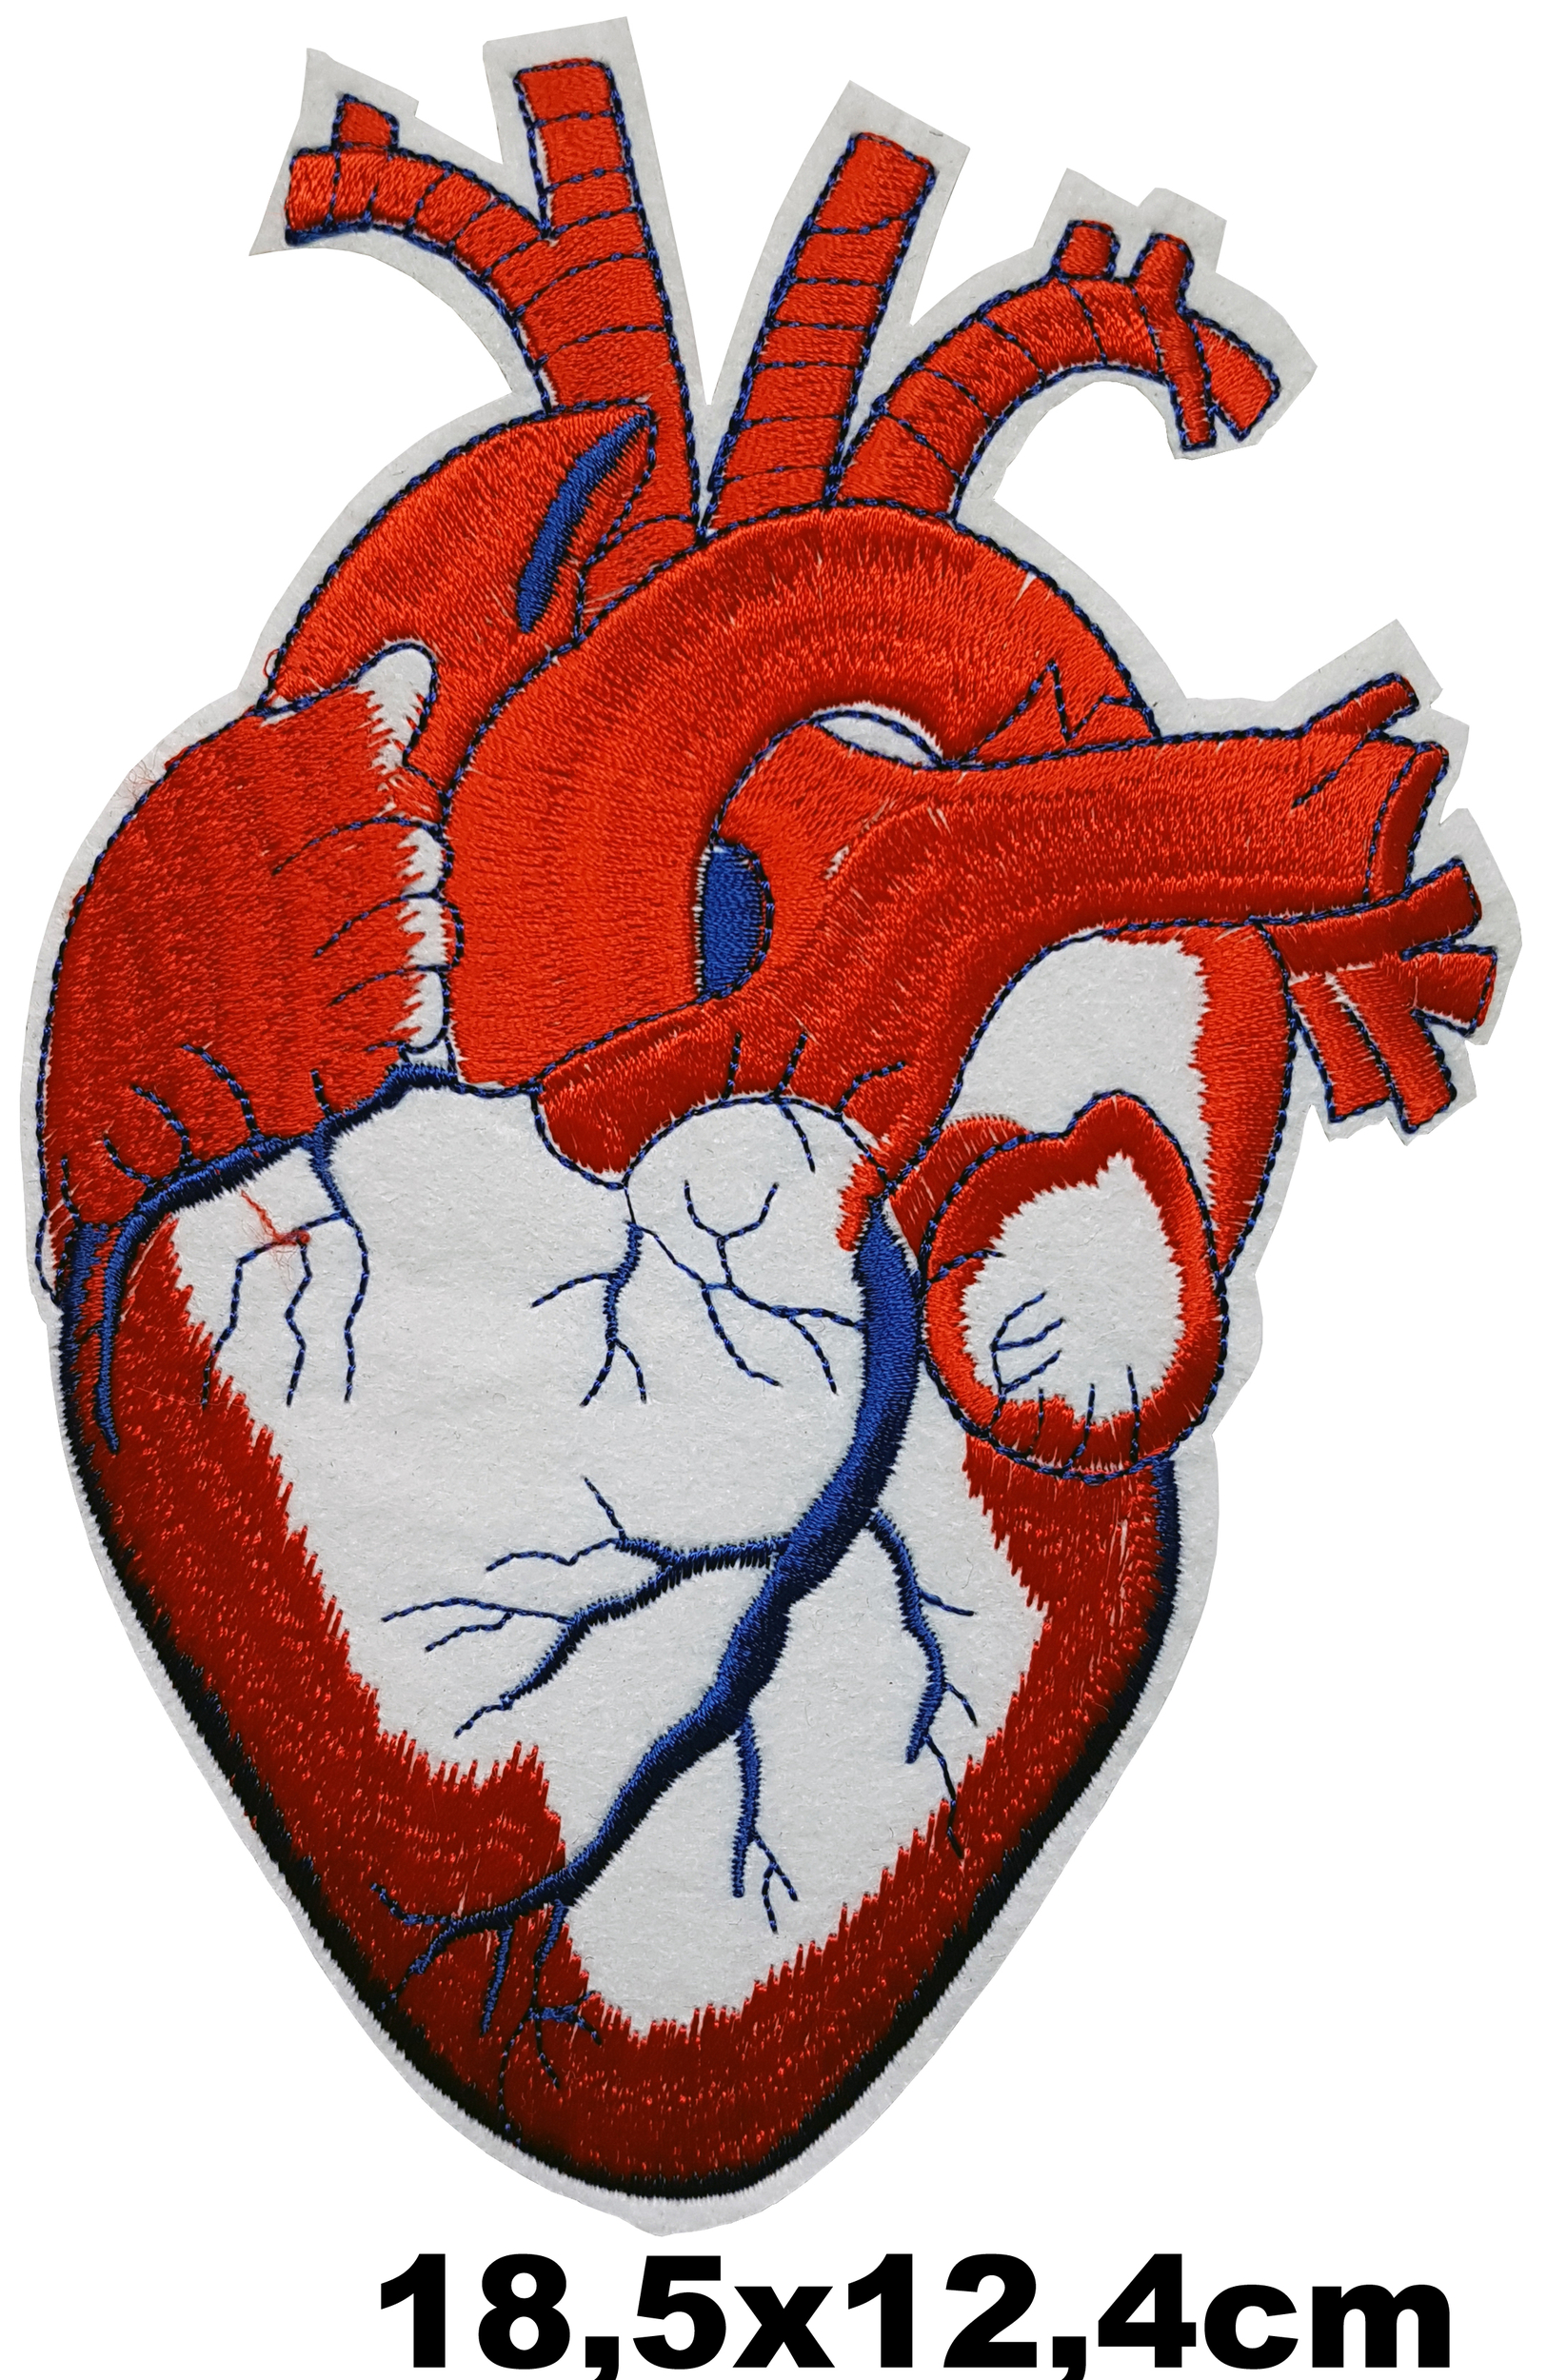 Grand Patch Thermocollant Coeur Veines Rouges